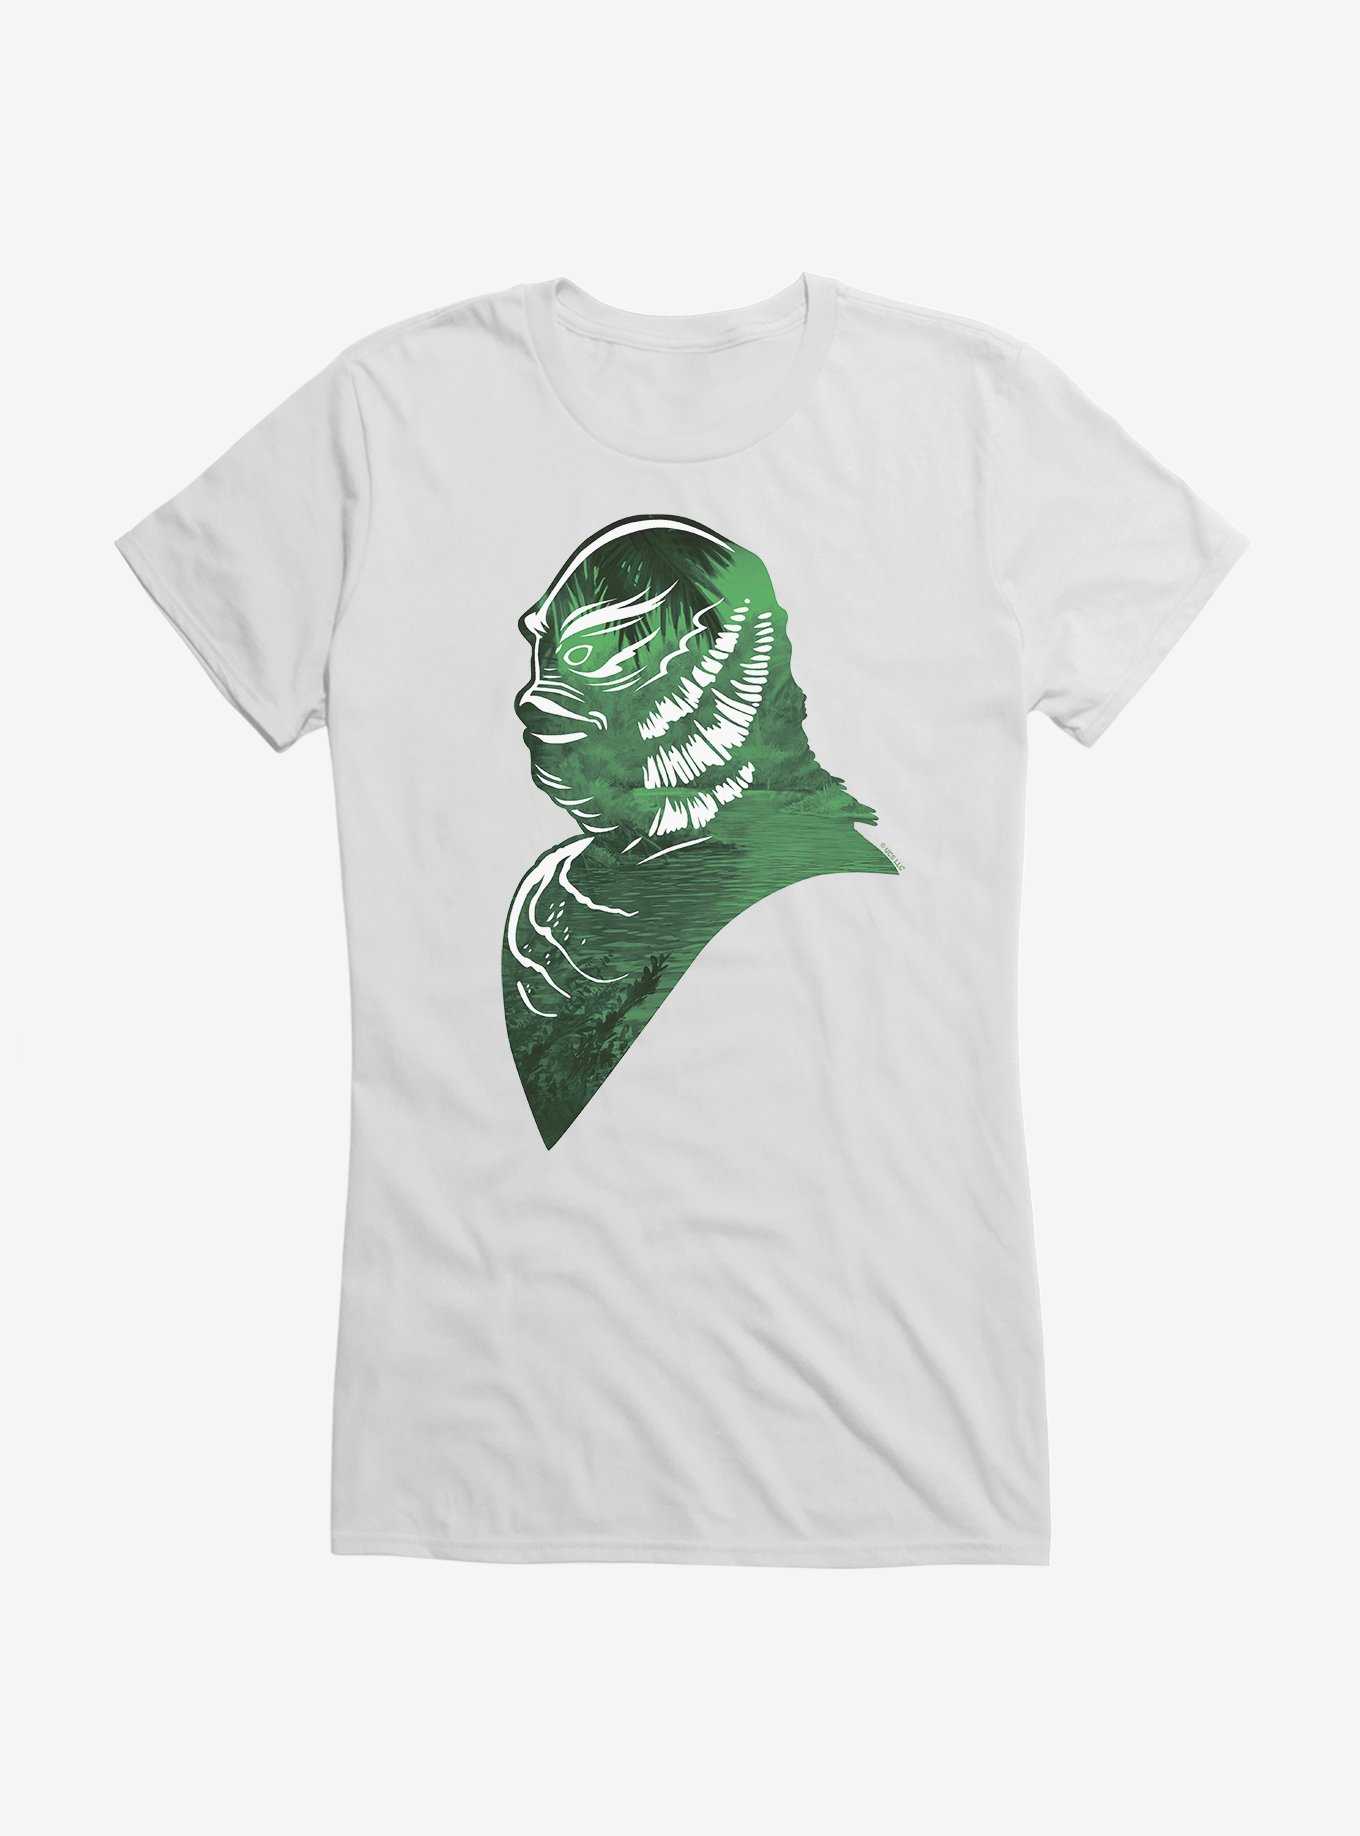 Universal Monsters Creature From The Black Lagoon Amazon Profile Girls T-Shirt, , hi-res